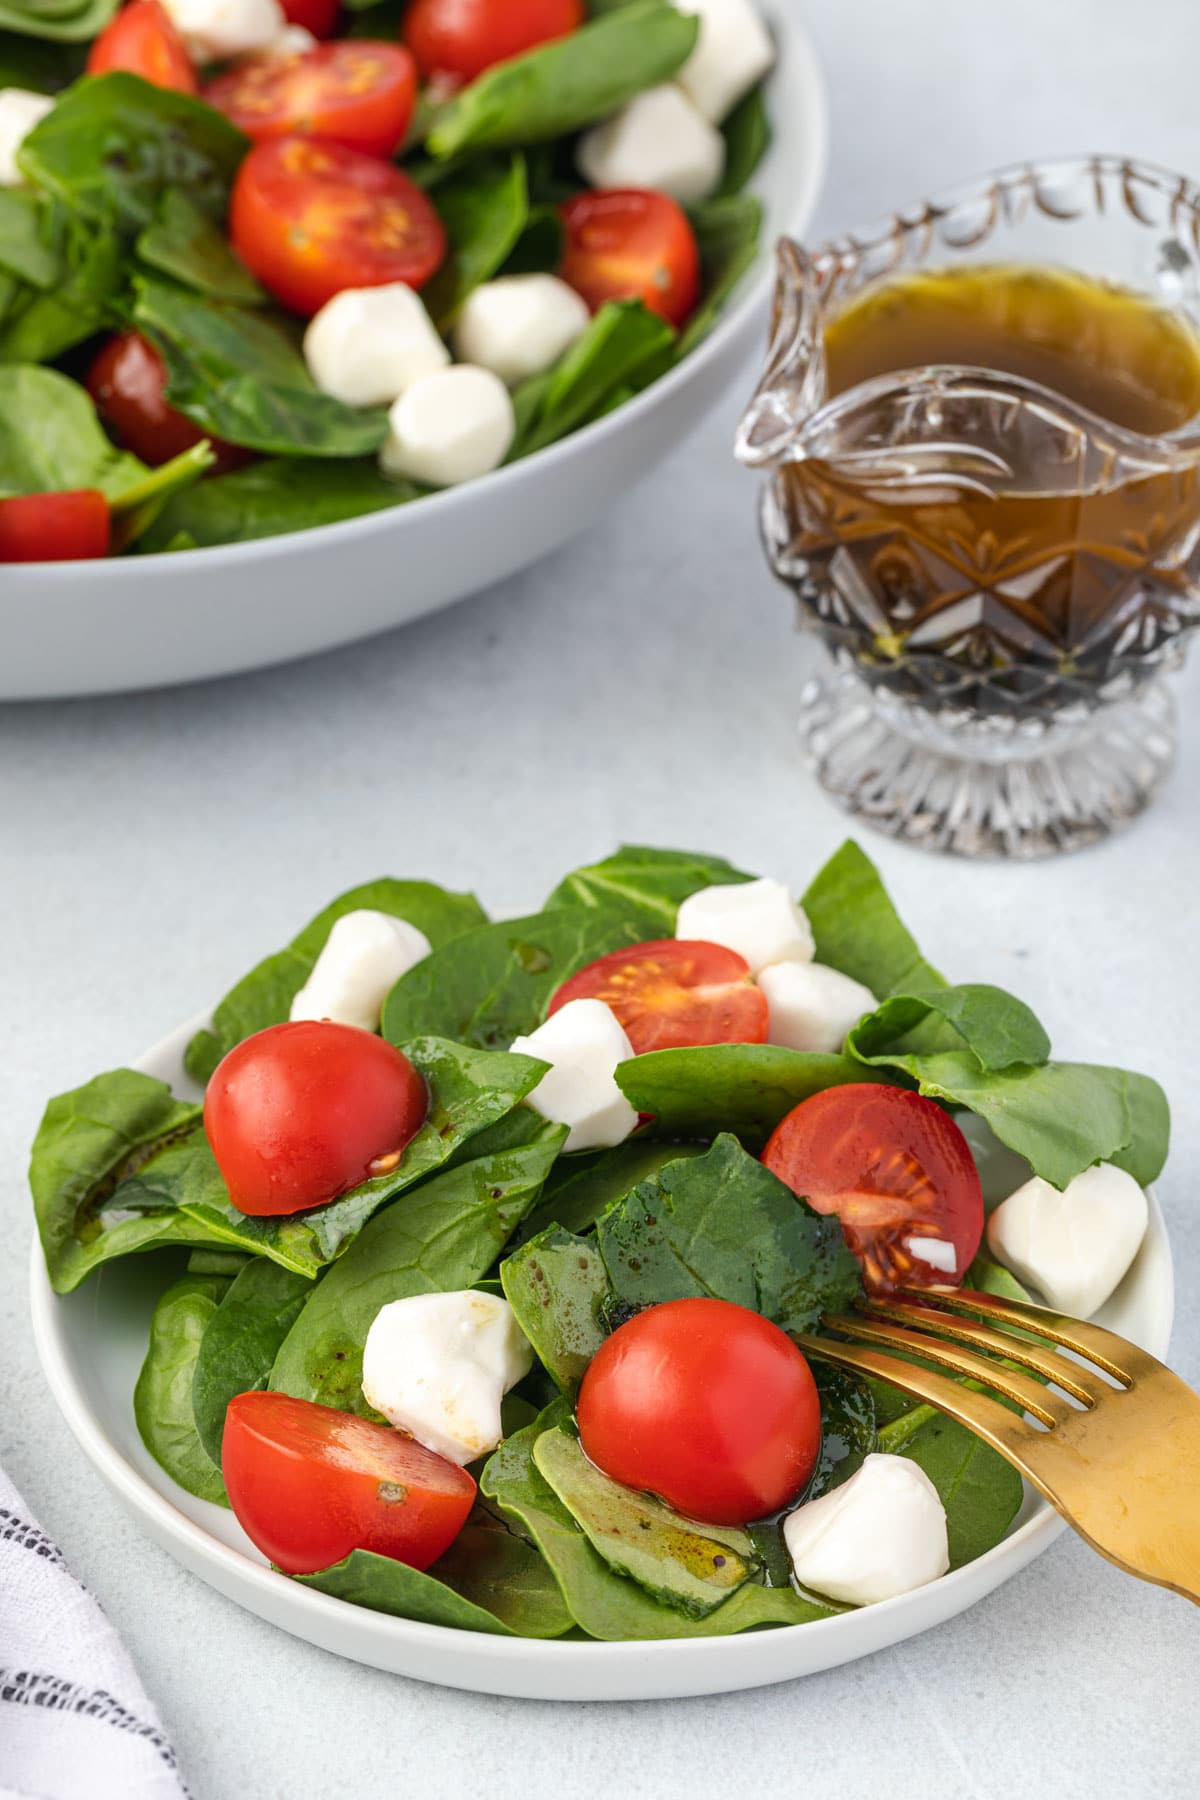 Individual plate of spinach, cheese, and tomatoes, with crystal dressing pitcher.